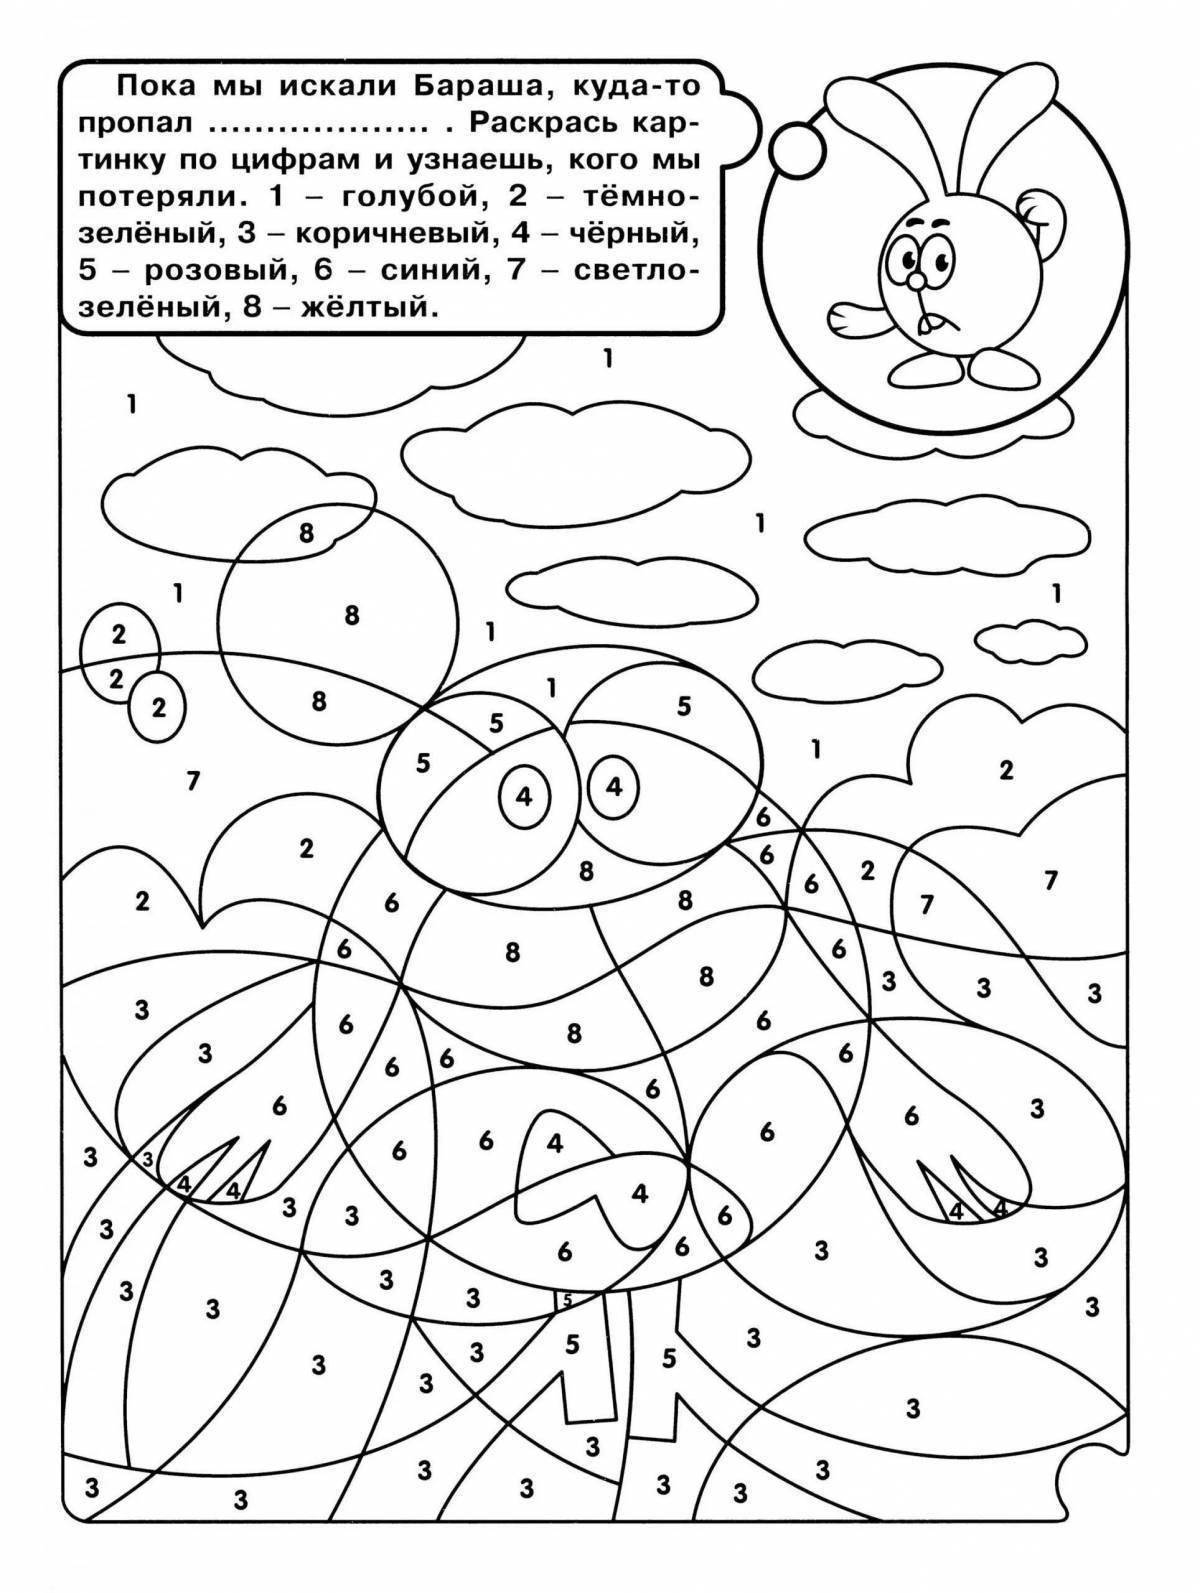 Adorable coloring pages for 7 years old